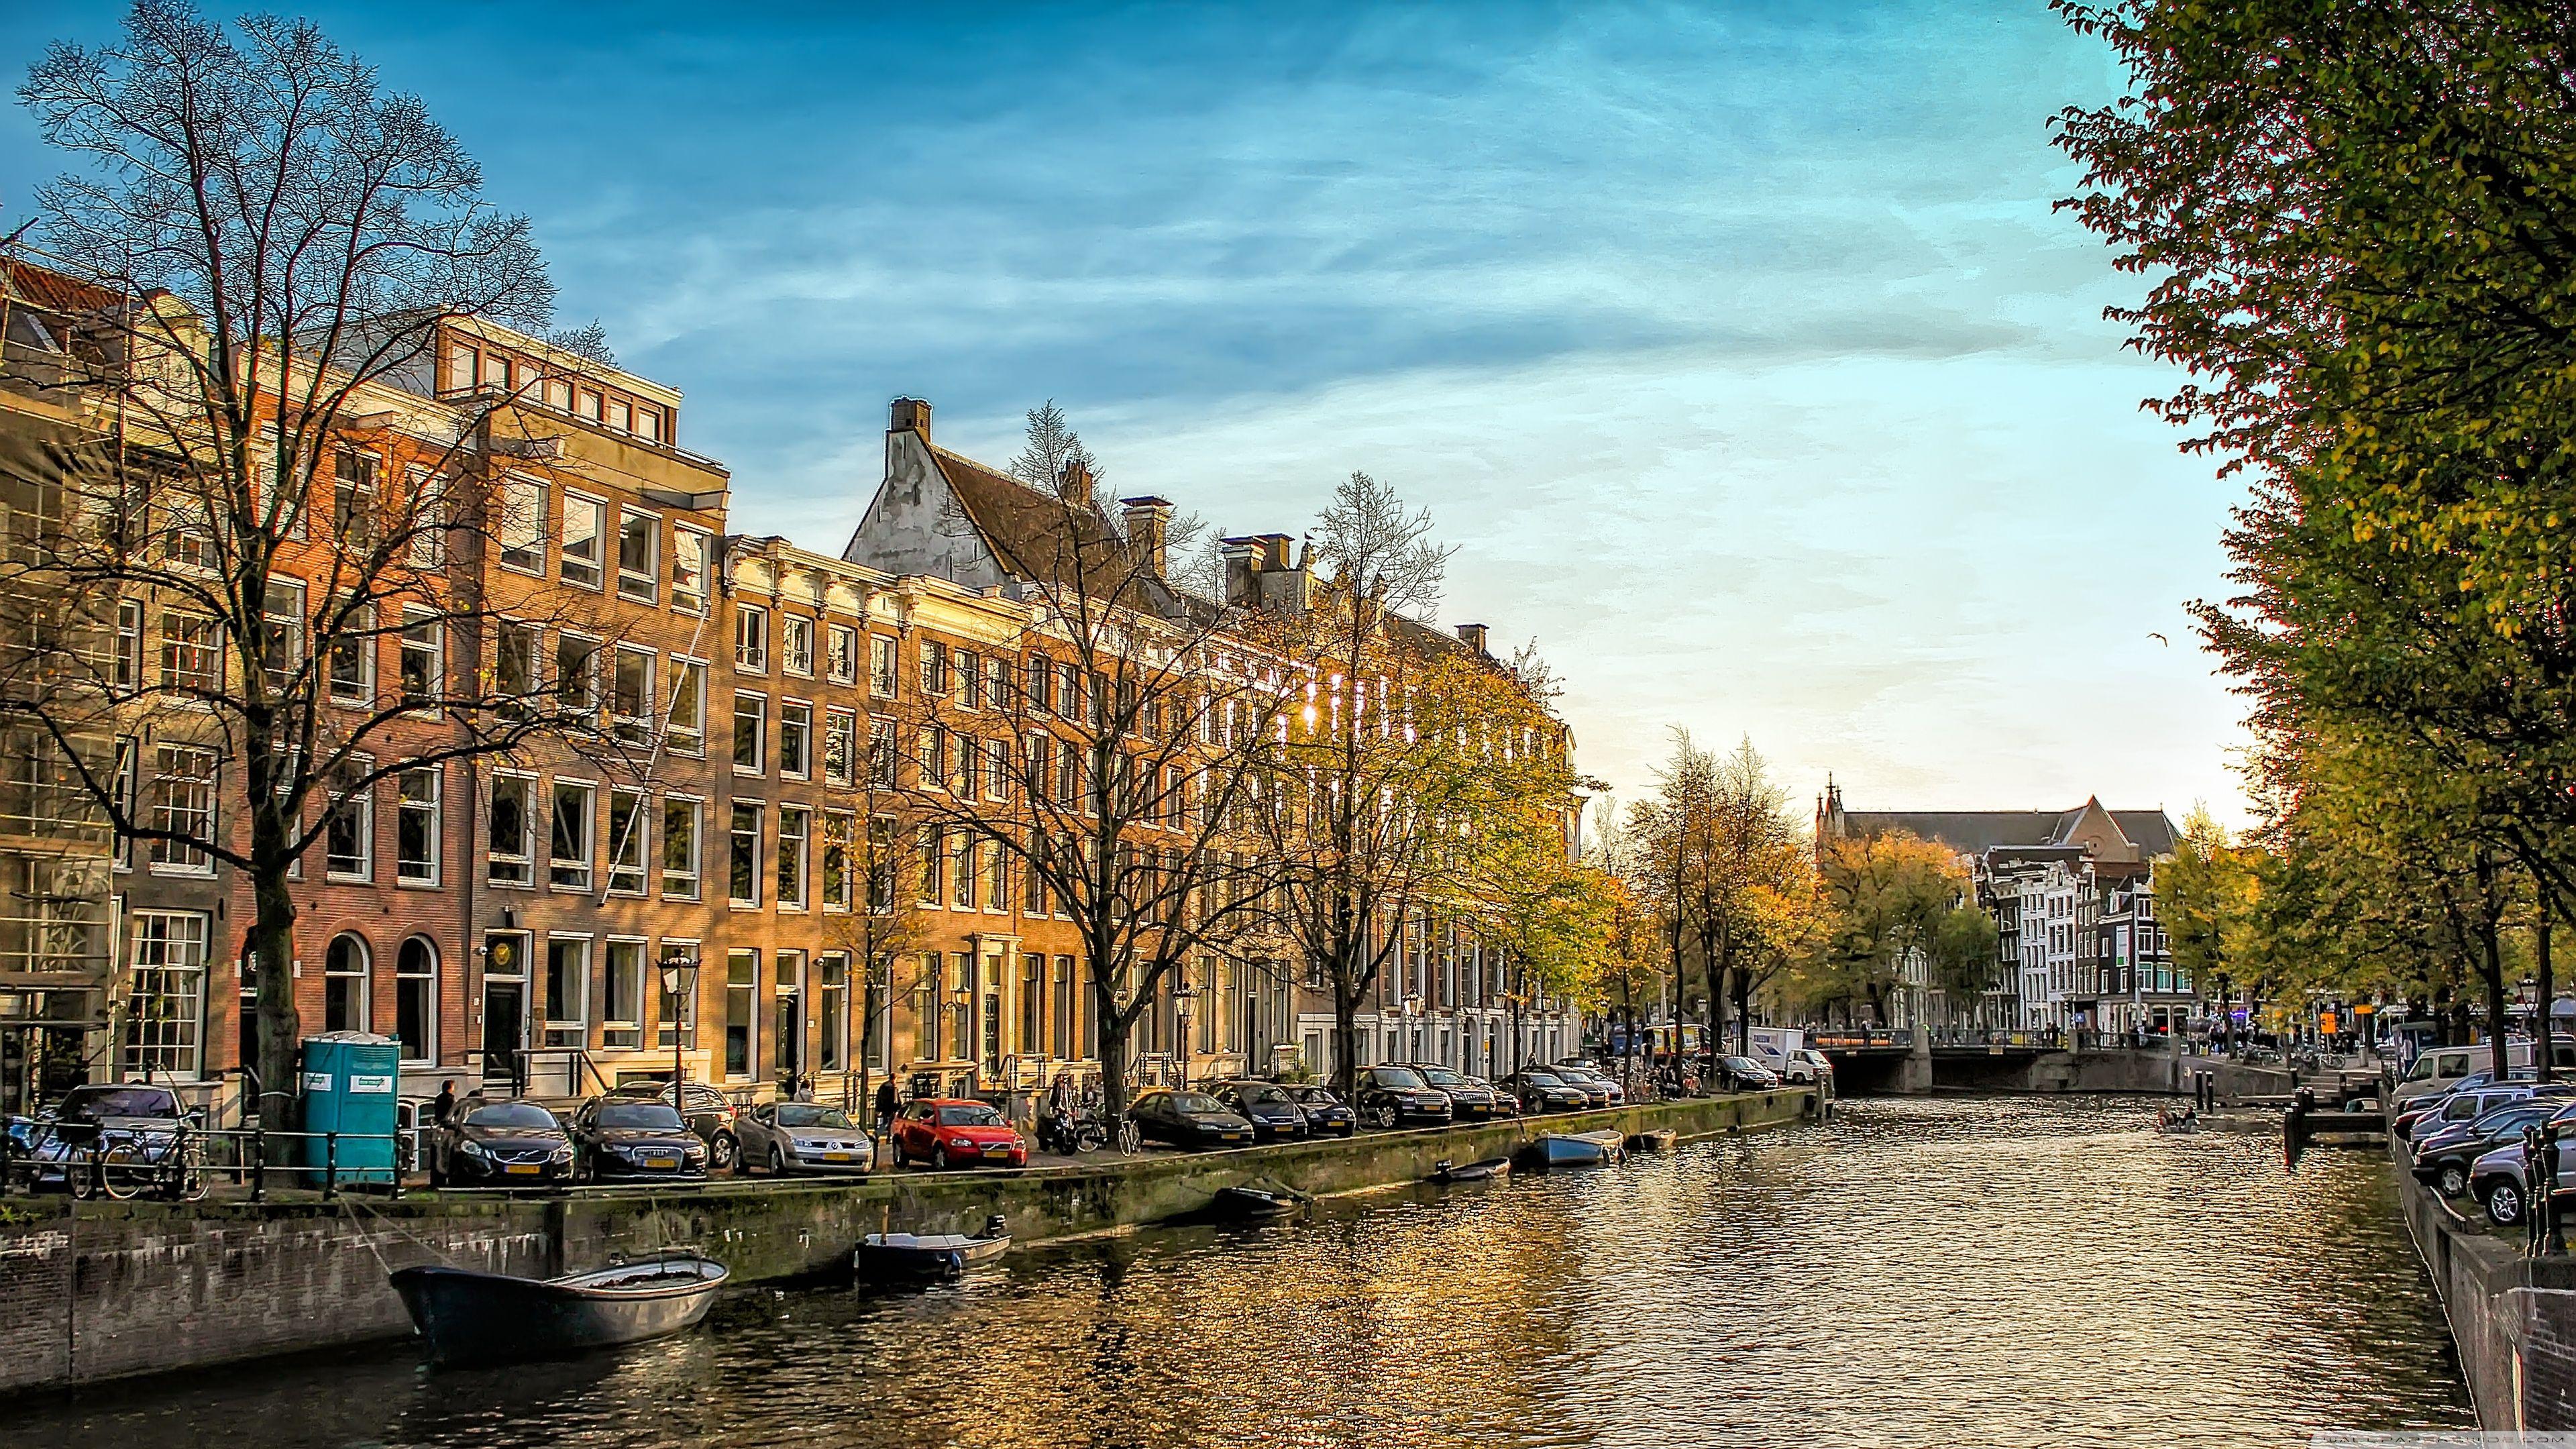 Amsterdam 4k Wallpapers - Top Free Amsterdam 4k Backgrounds ...